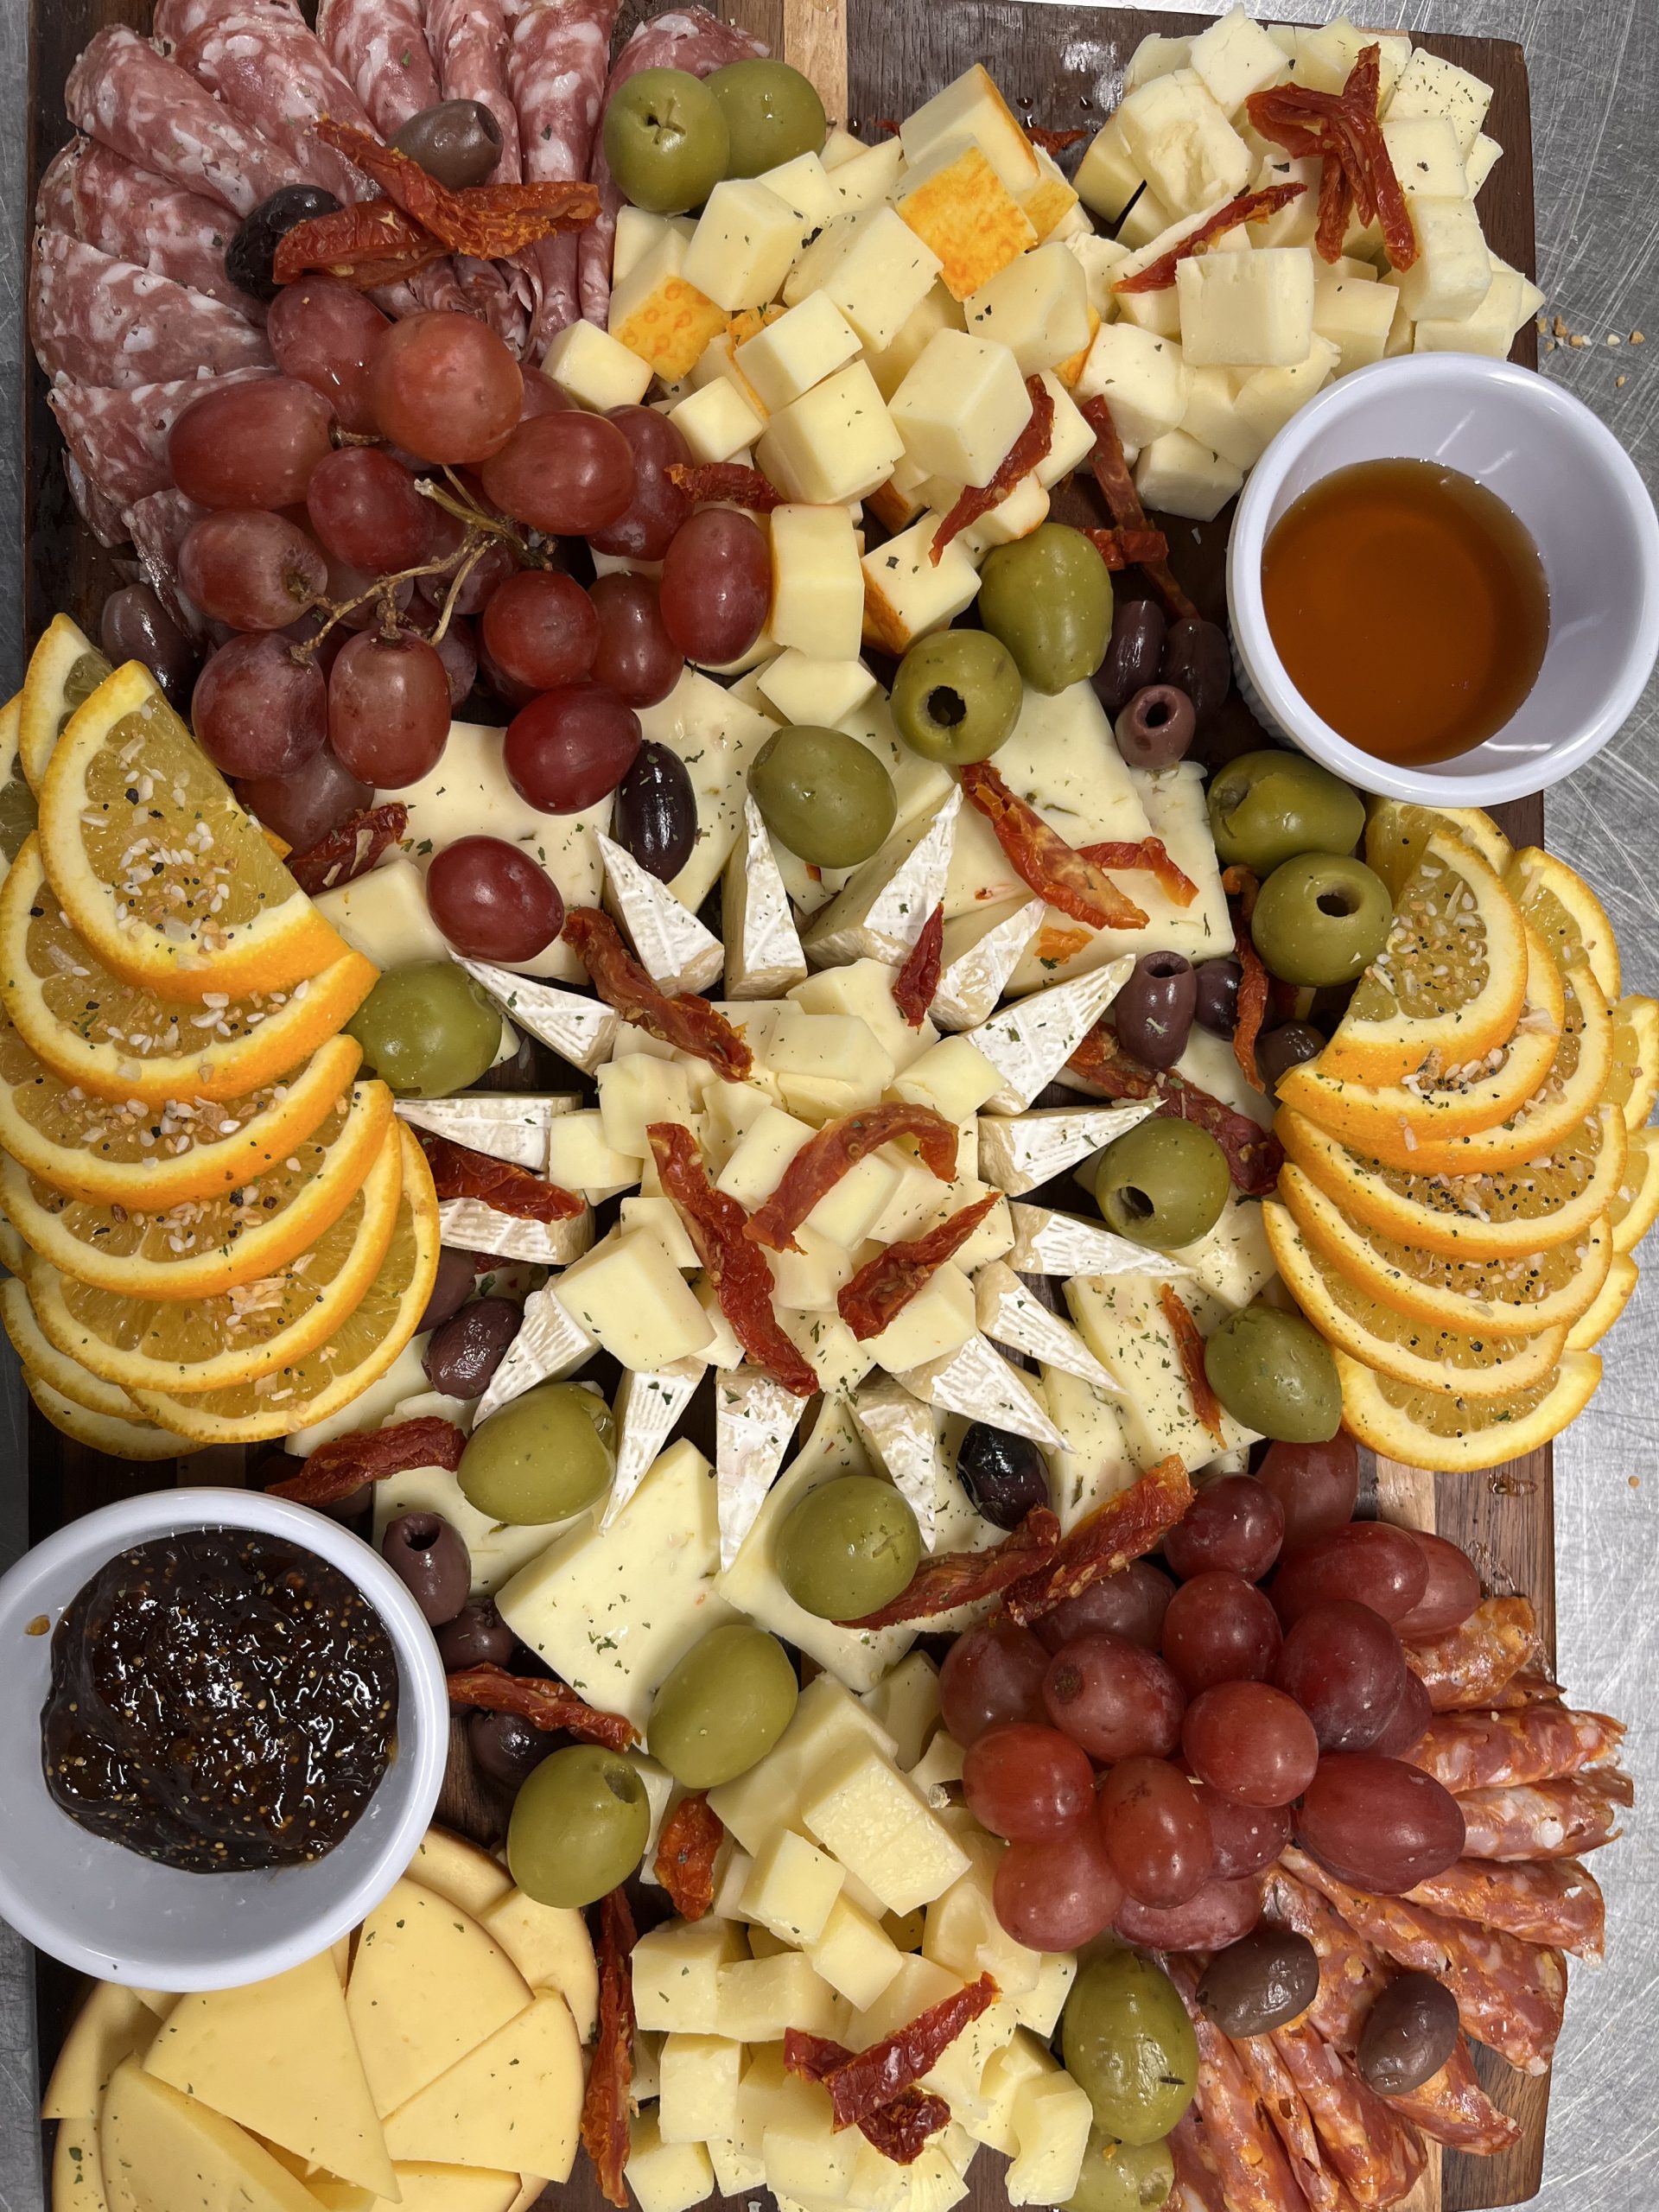 A platter of cheese, olives, and grapes.